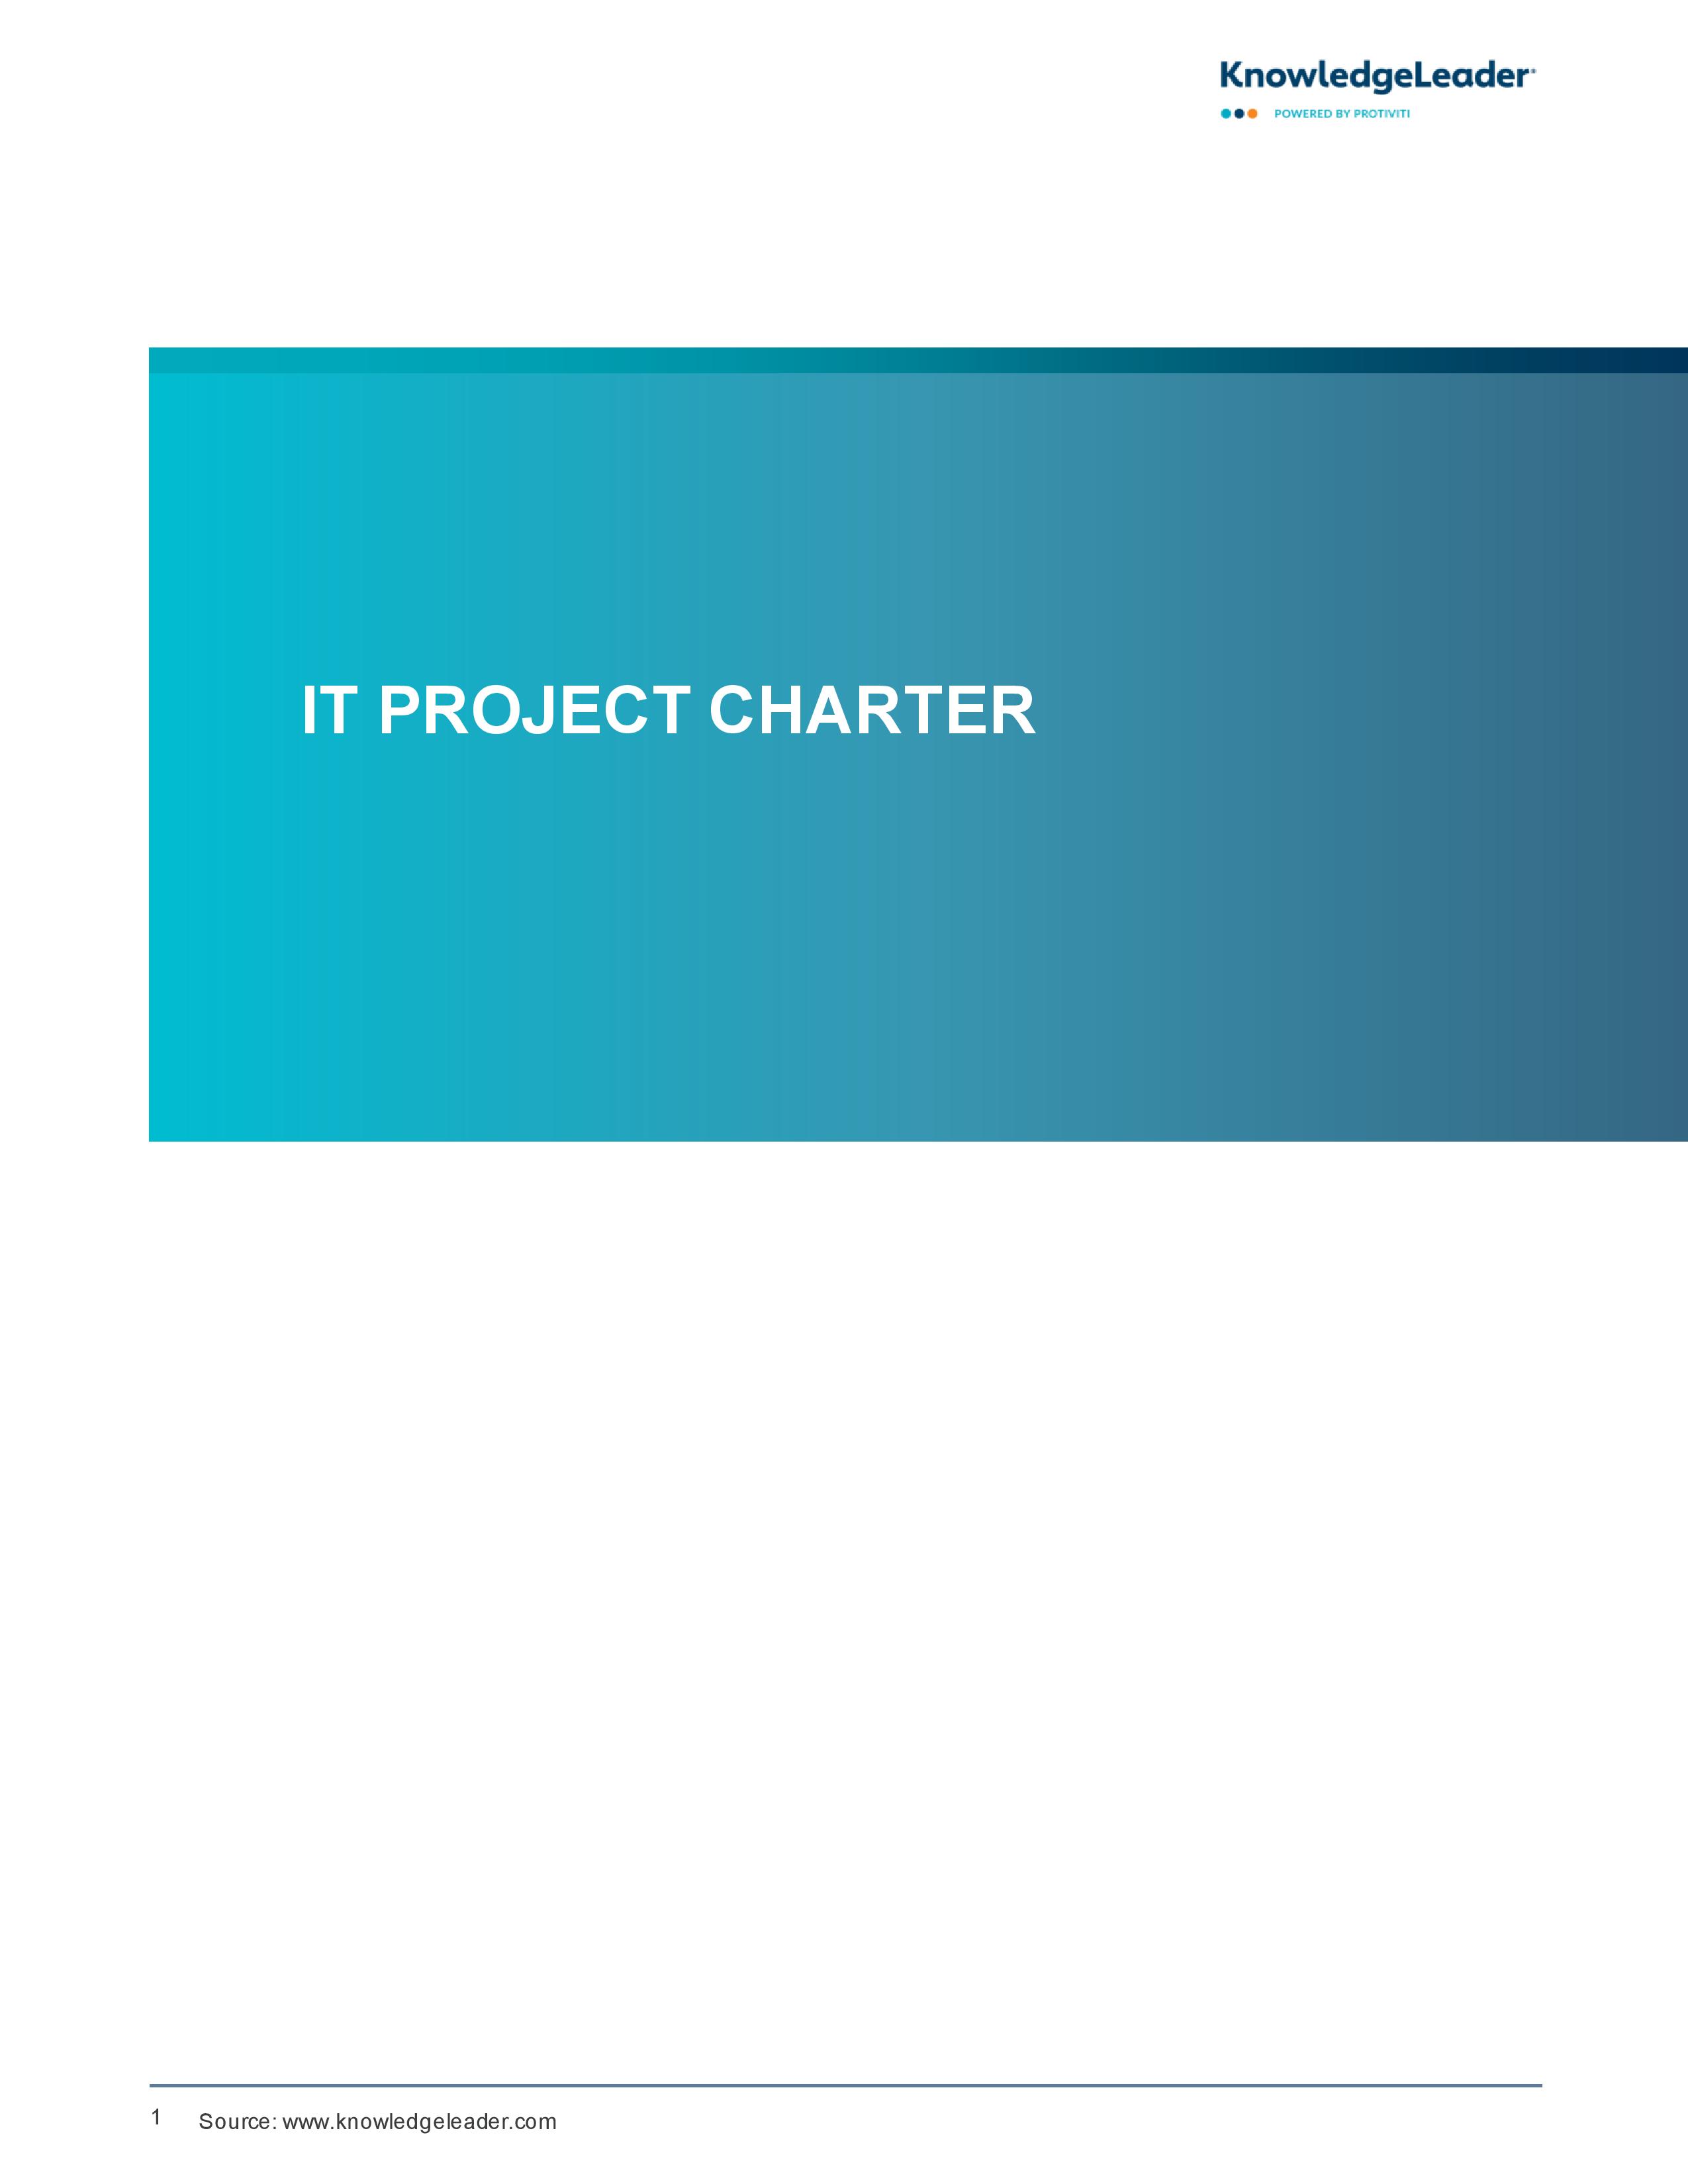 Screenshot of the first page of IT Project Charter